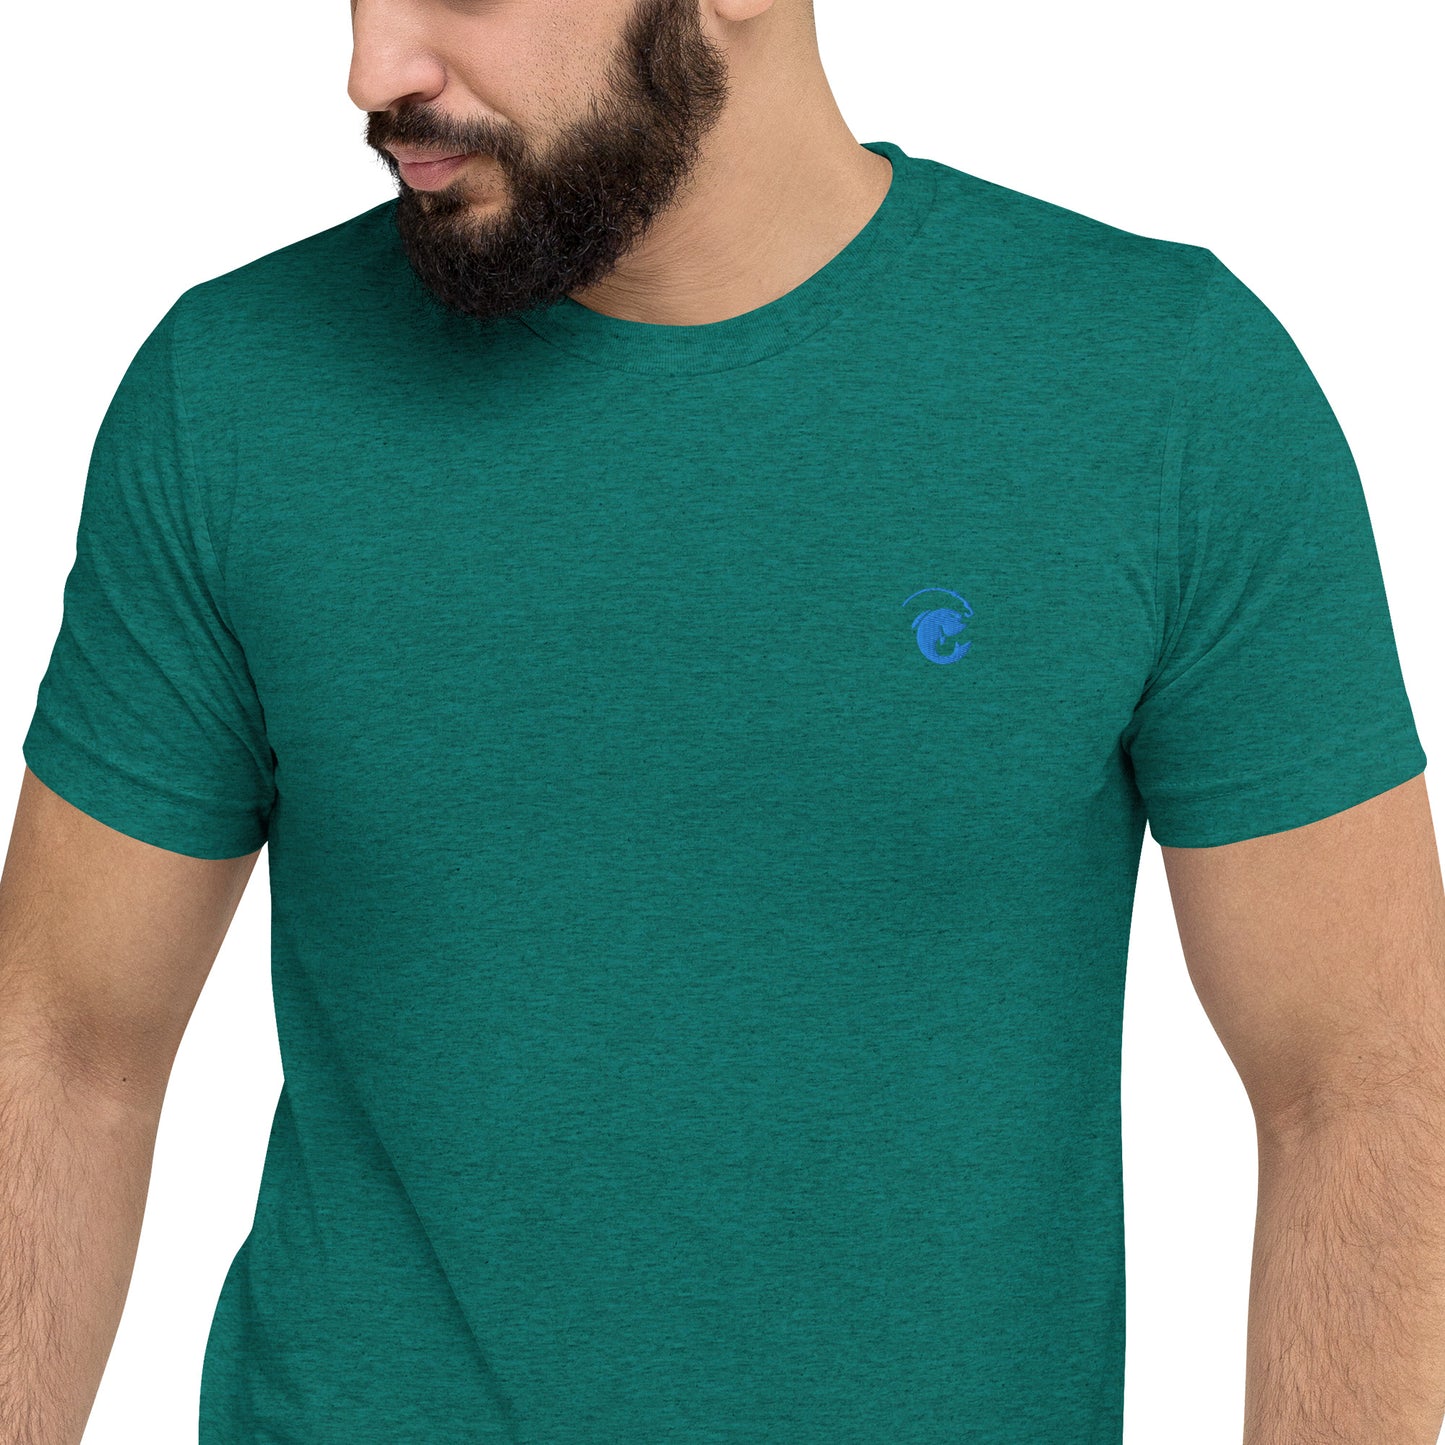 Fitted Durable Vintage T-Shirt - Aqua